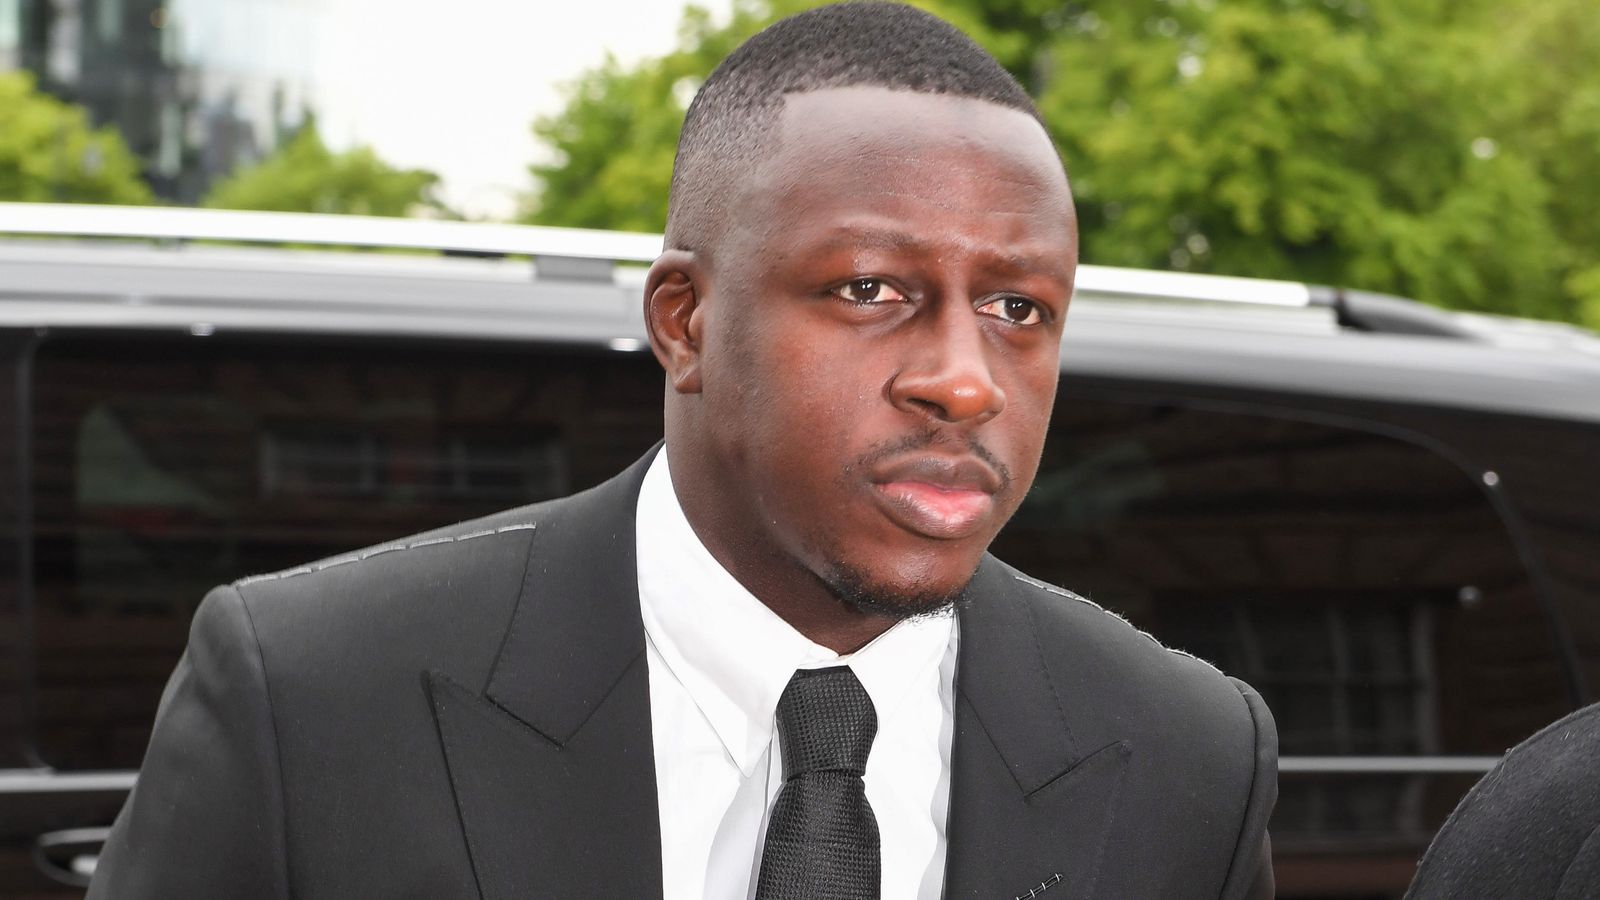 Benjamin Mendy: Manchester City defender pleads not guilty to eighth count of rape ahead of trial